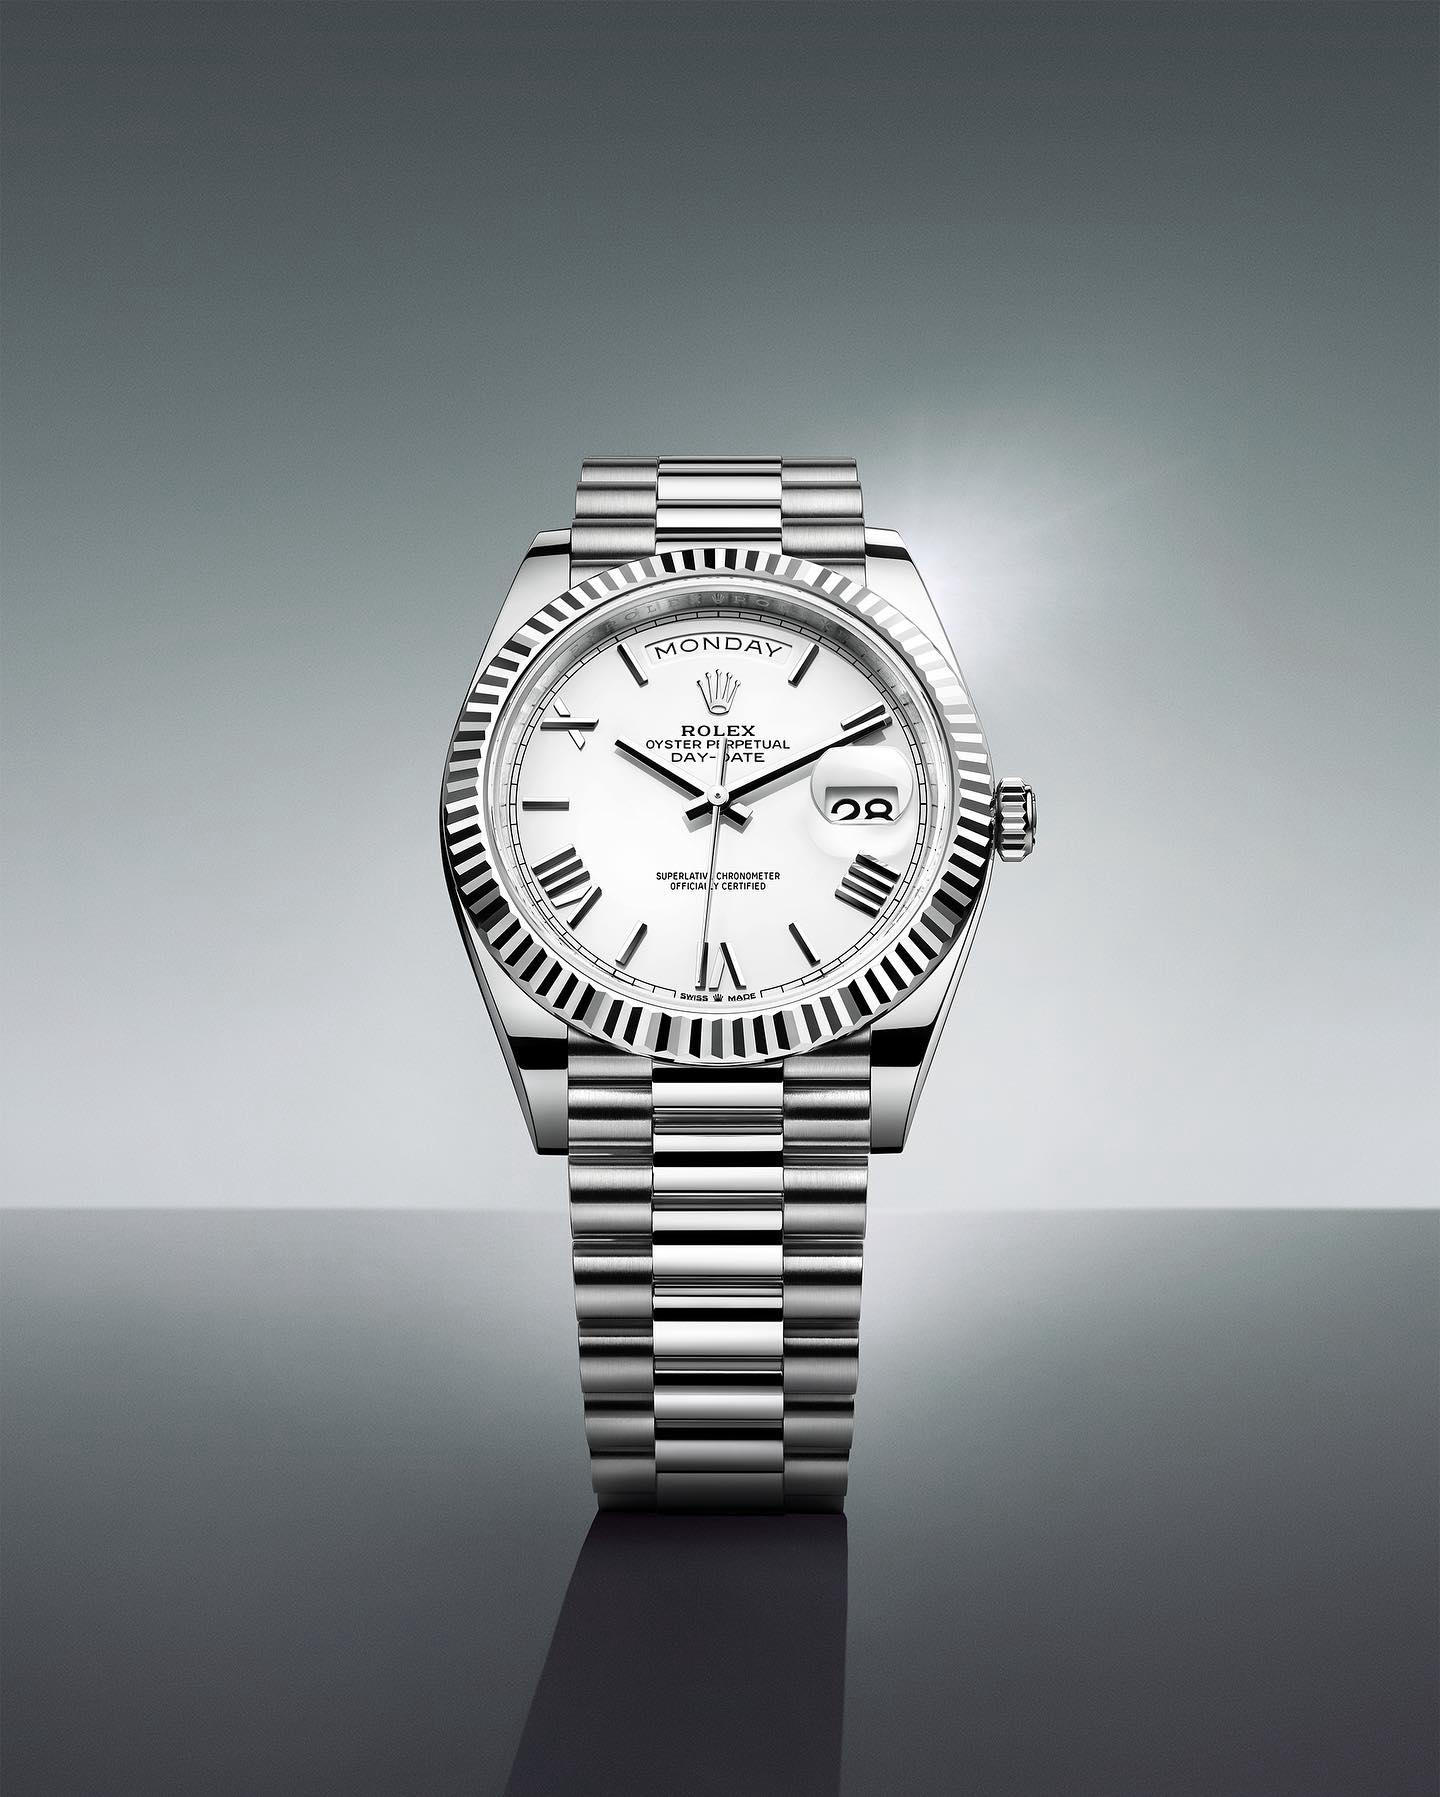 ROLEX - The Day-Date 40 in 950 platinum featuring a white dial with faceted, deconstructed Roman num